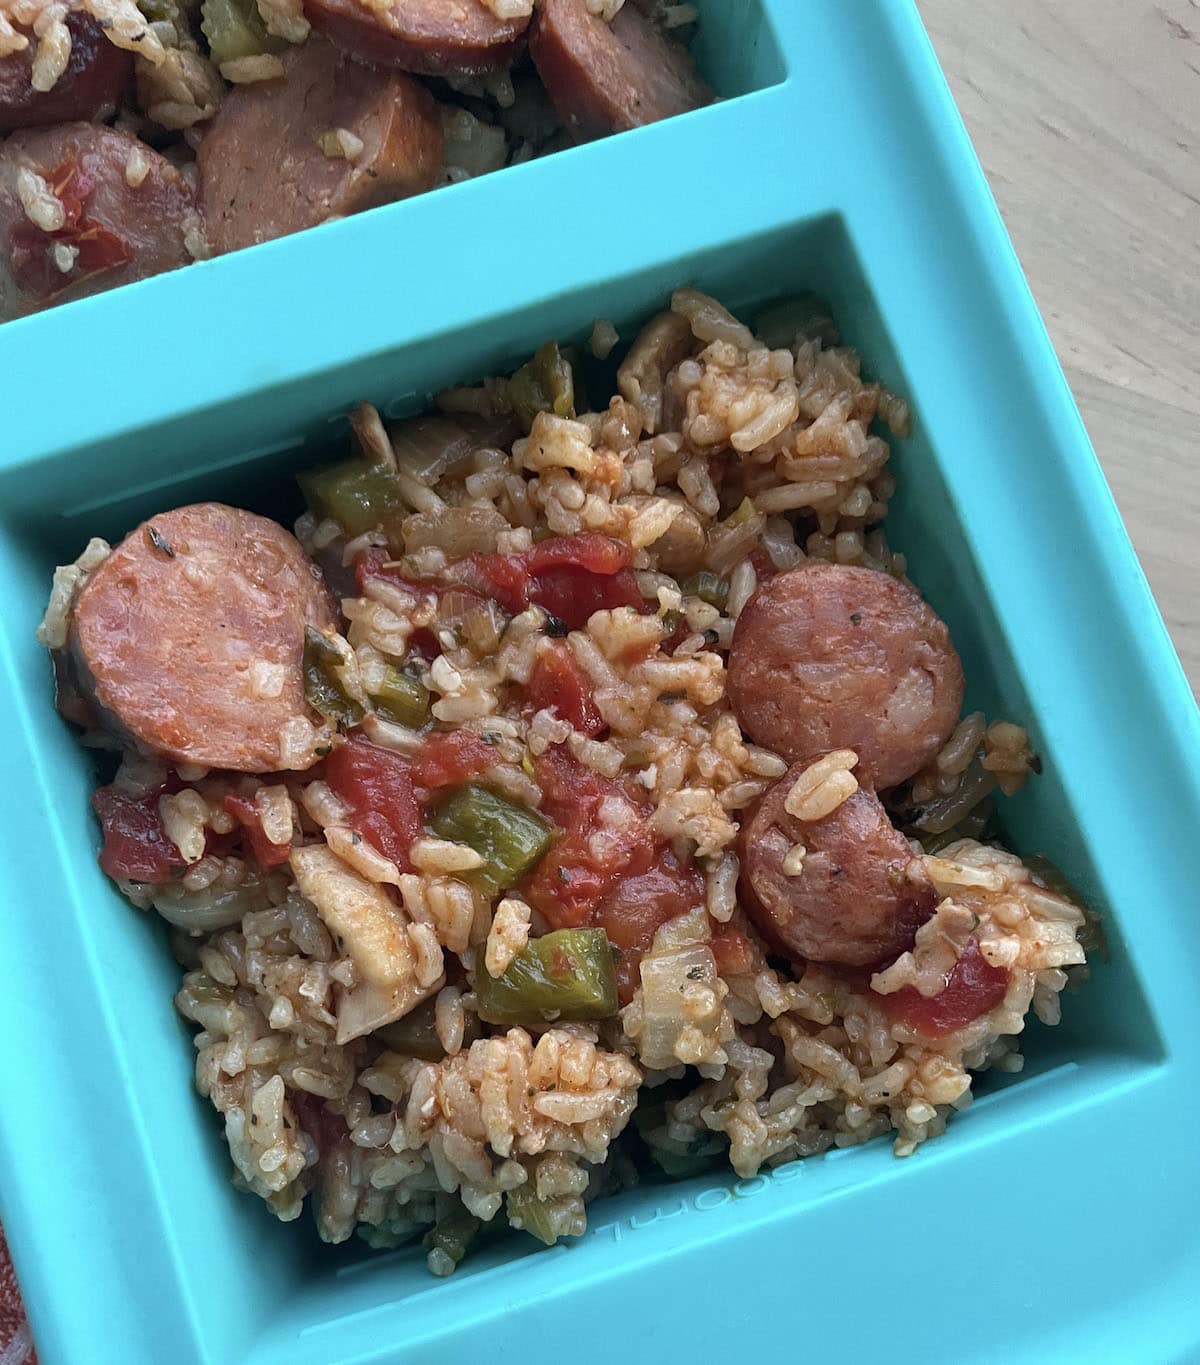 A filled Souper cube container showing how to freeze jambalaya.